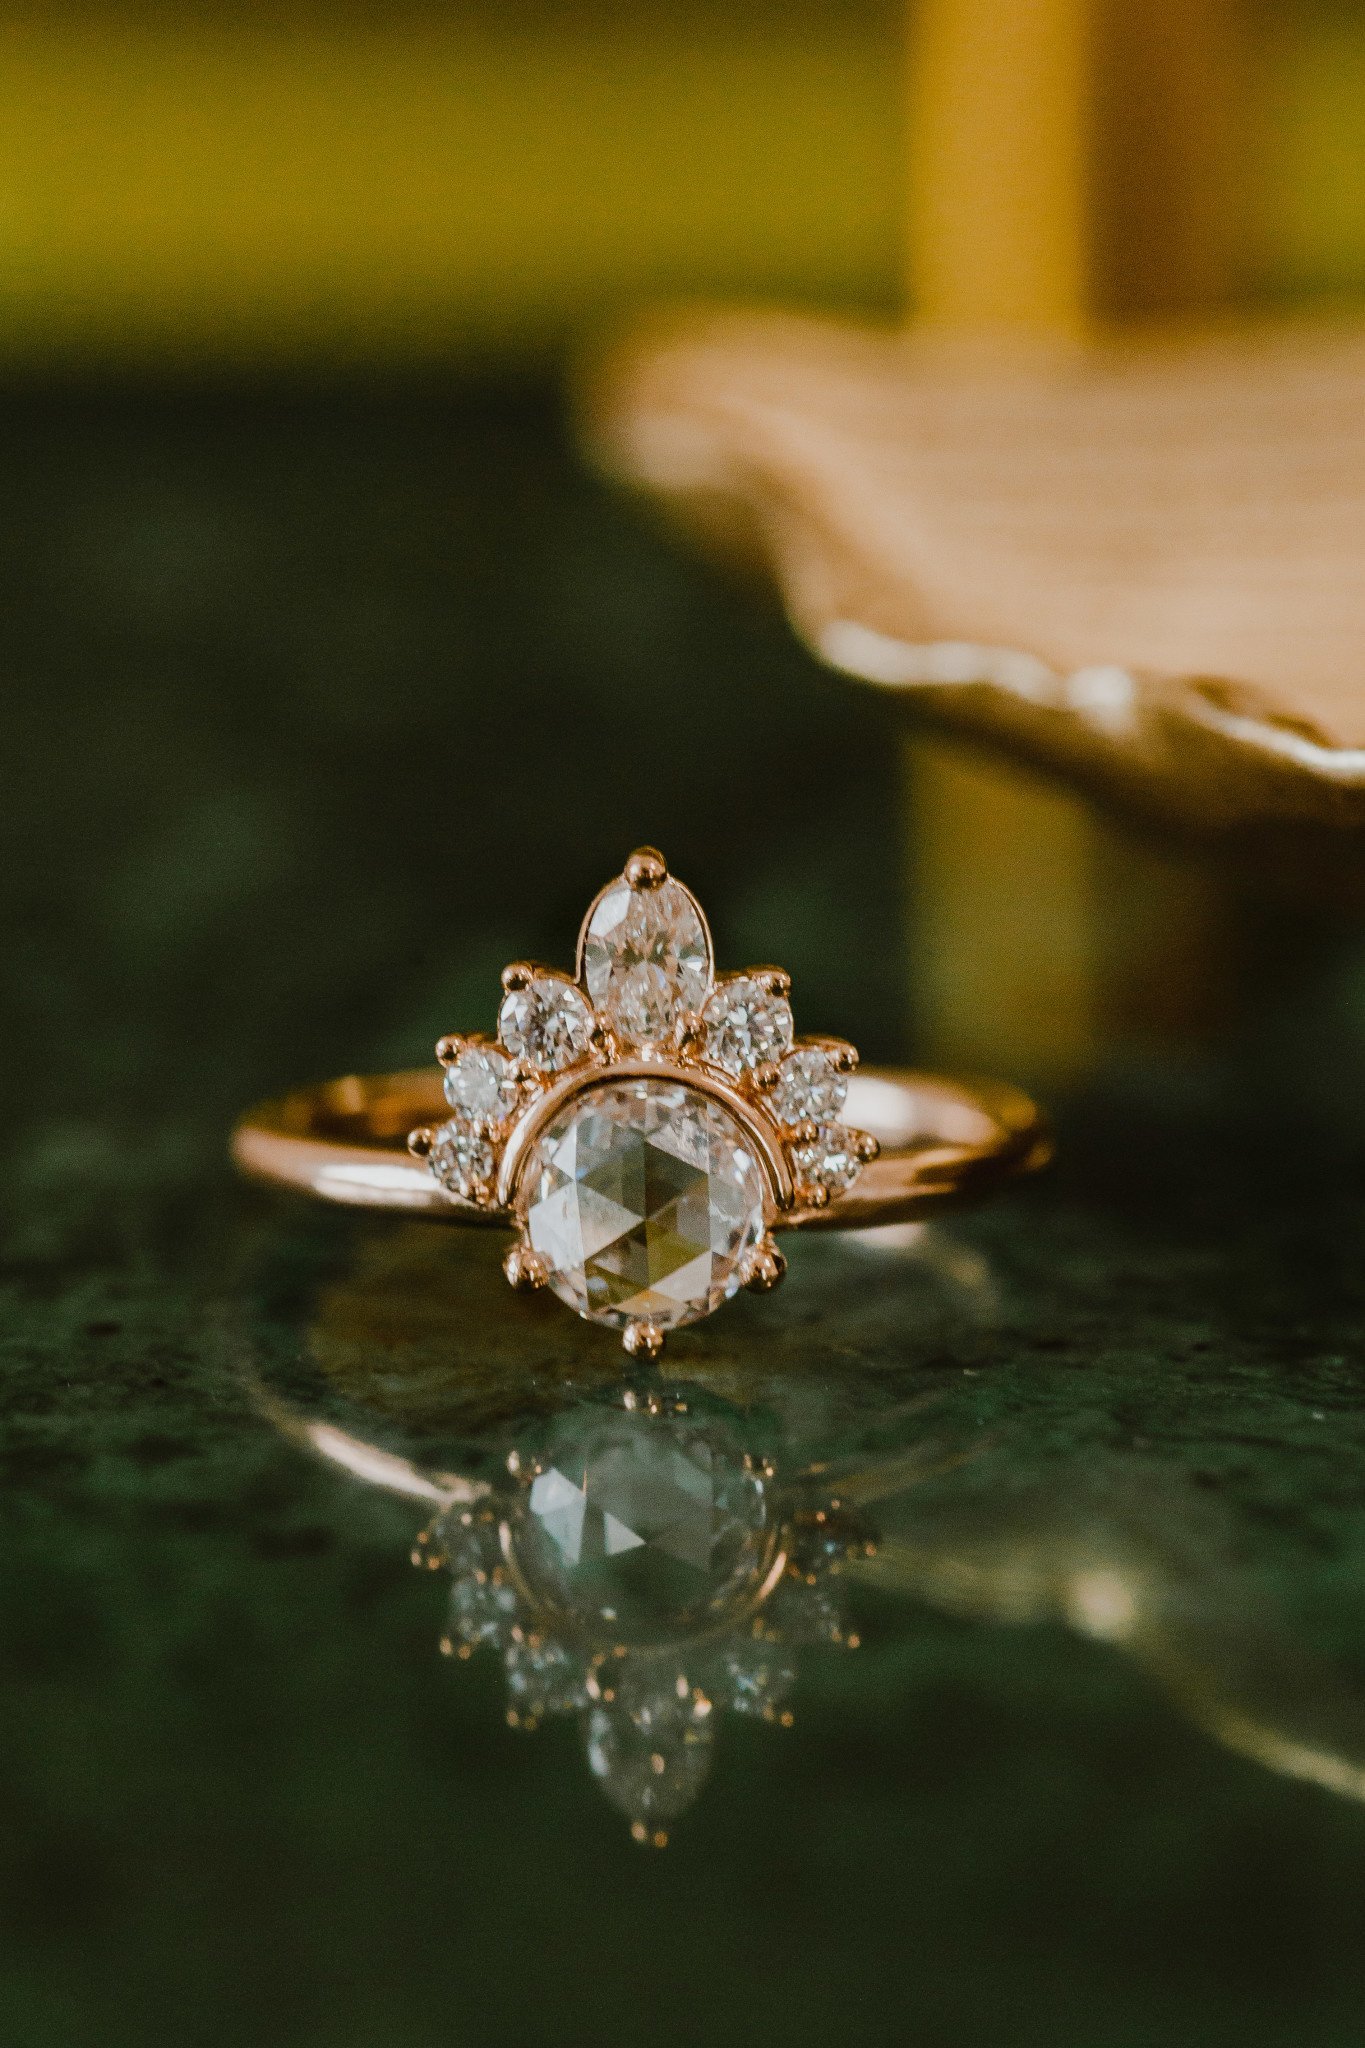 Radiant Rose Cut Diamond Ring in Ethical Gold - Gardens of the Sun |  Ethical Jewelry